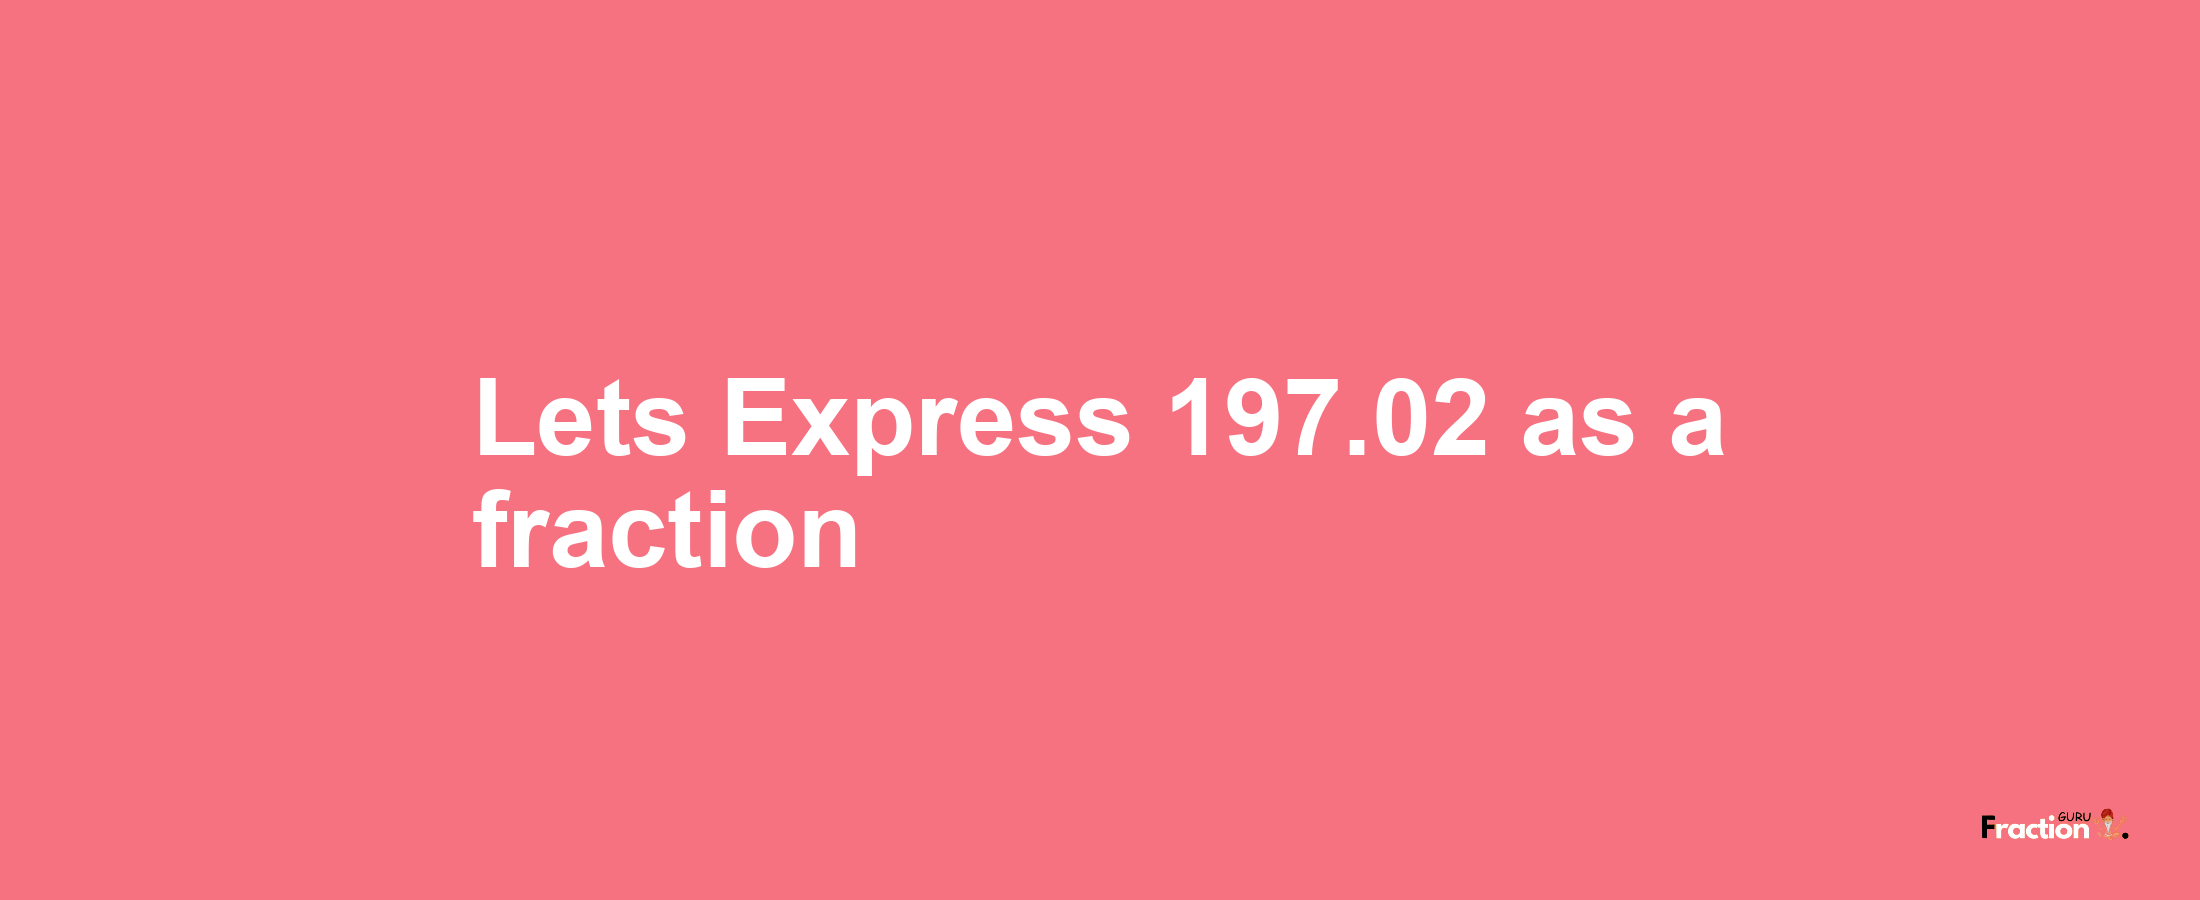 Lets Express 197.02 as afraction